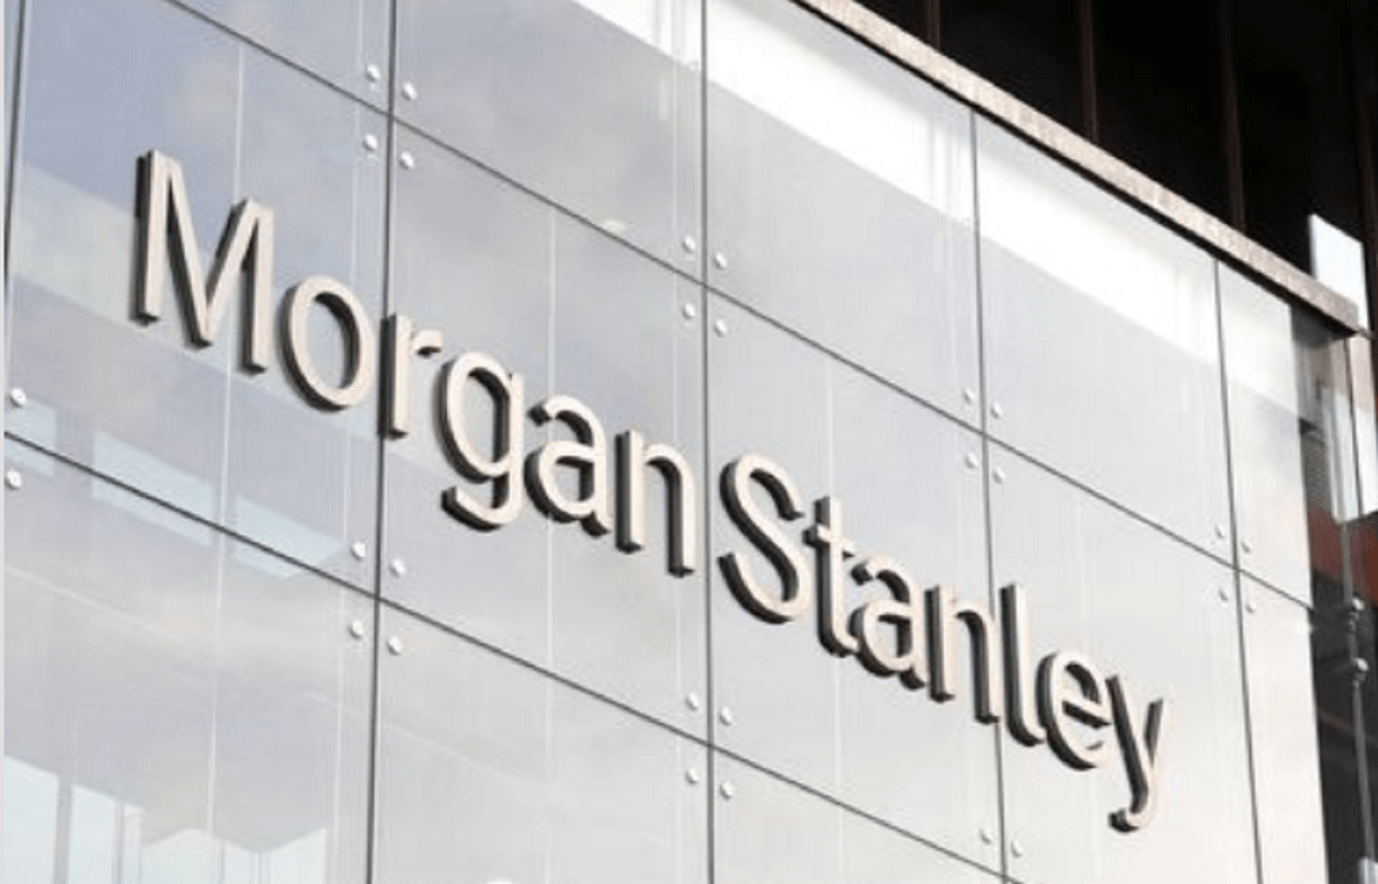 Morgan Stanley says investors should be cautious about Chinese stocks